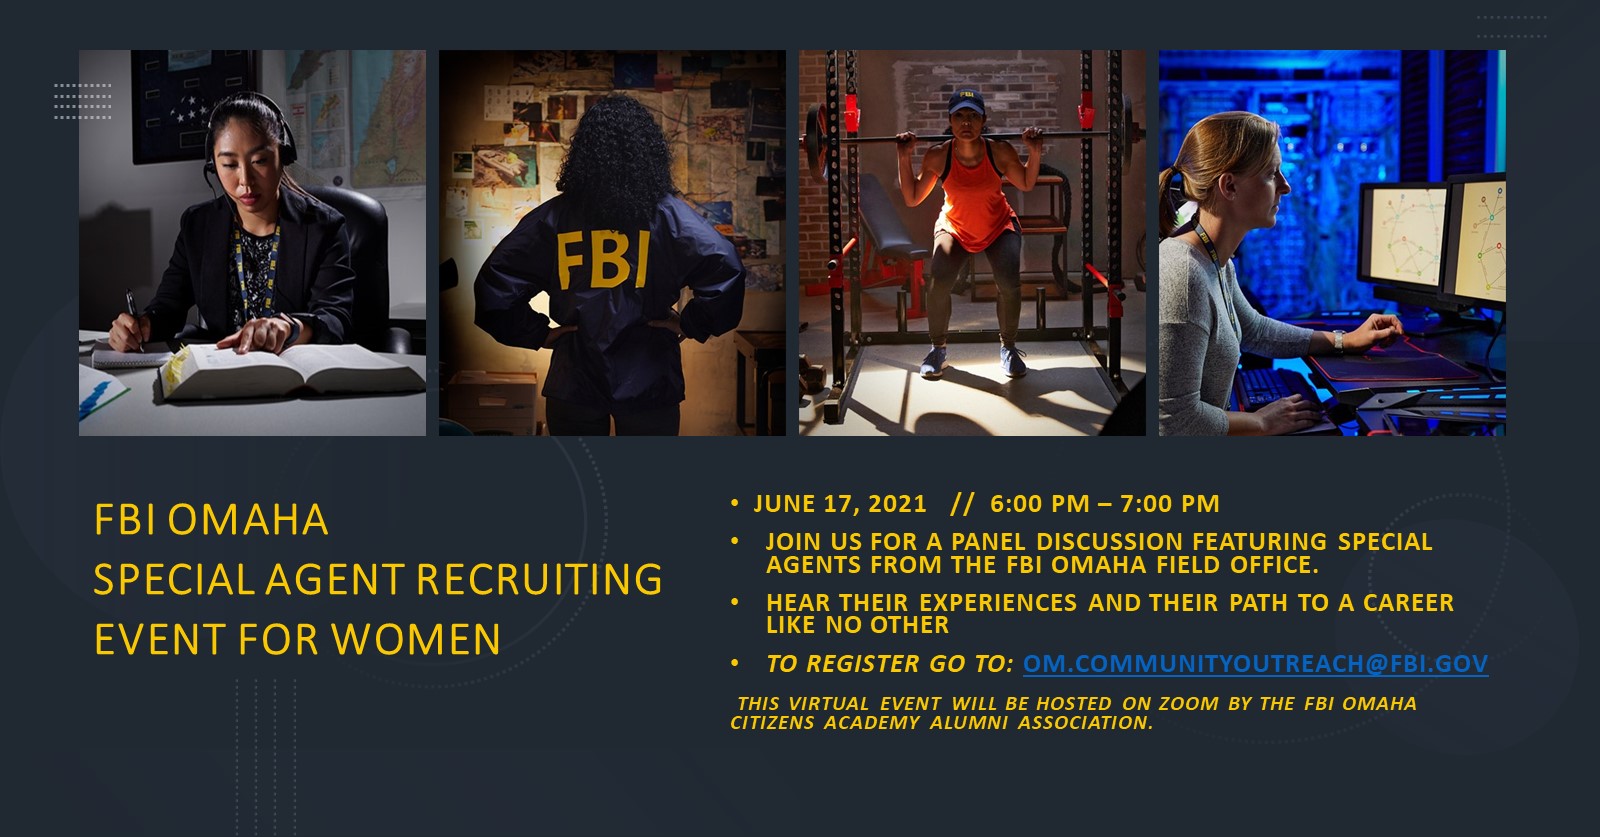 Fbi Omaha Special Agent Recruiting Event For Women June 17 2021 Announce University Of